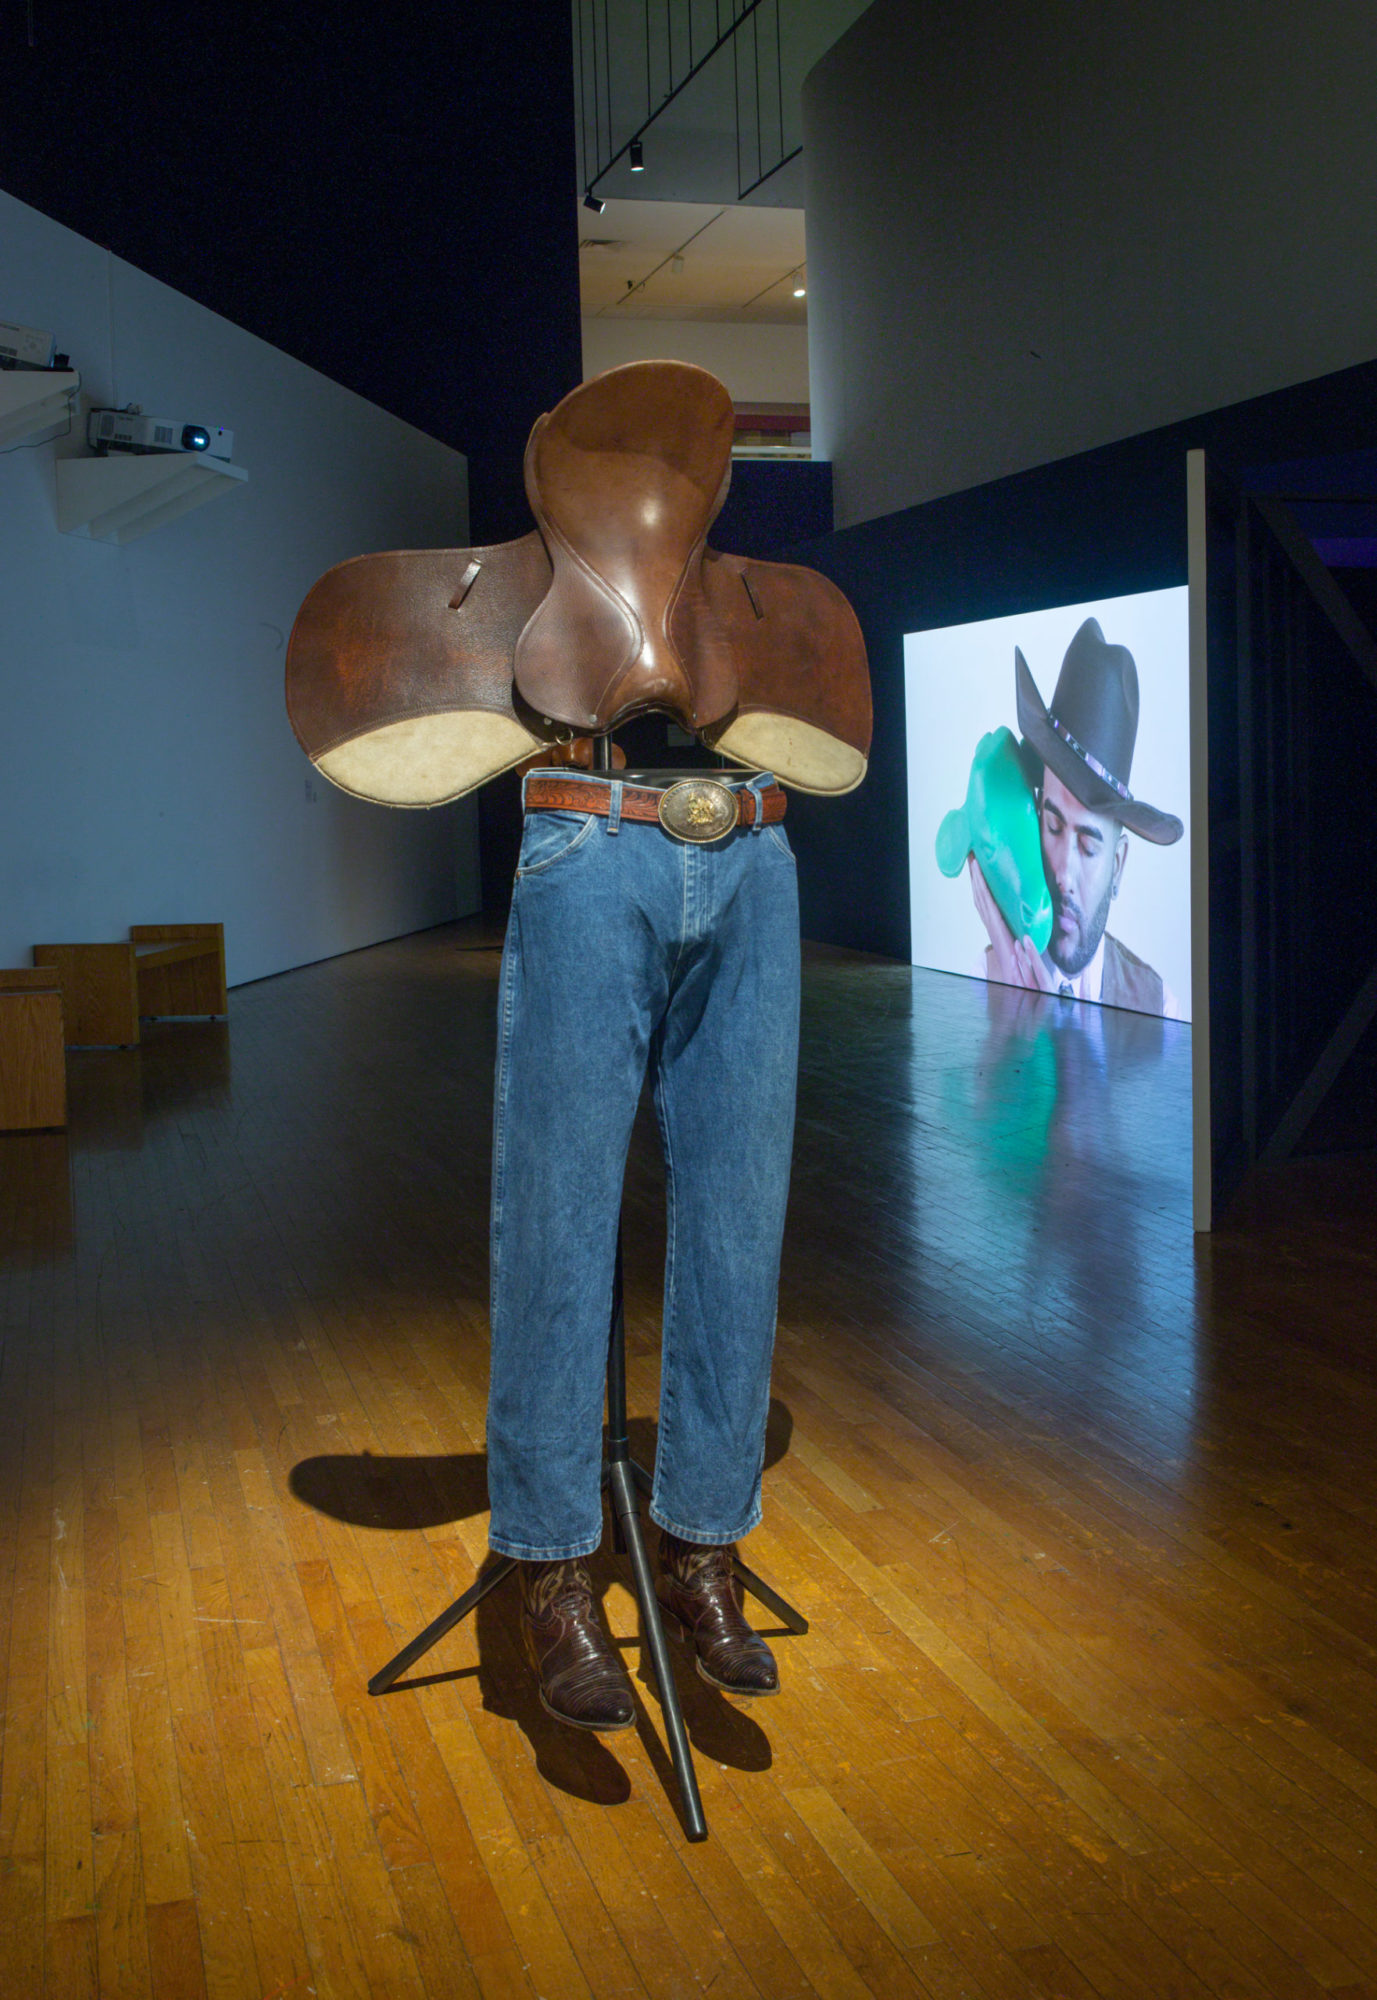 An installation view of Kenneth Tam's Silent Spikes at the Queen's Museum. The image features a sculpture of the legs of a mannequin clad in denim, cowboy boots, and a belt and the upper half being comprised of a brown leather saddle. The lights in the gallery space are dimmed.